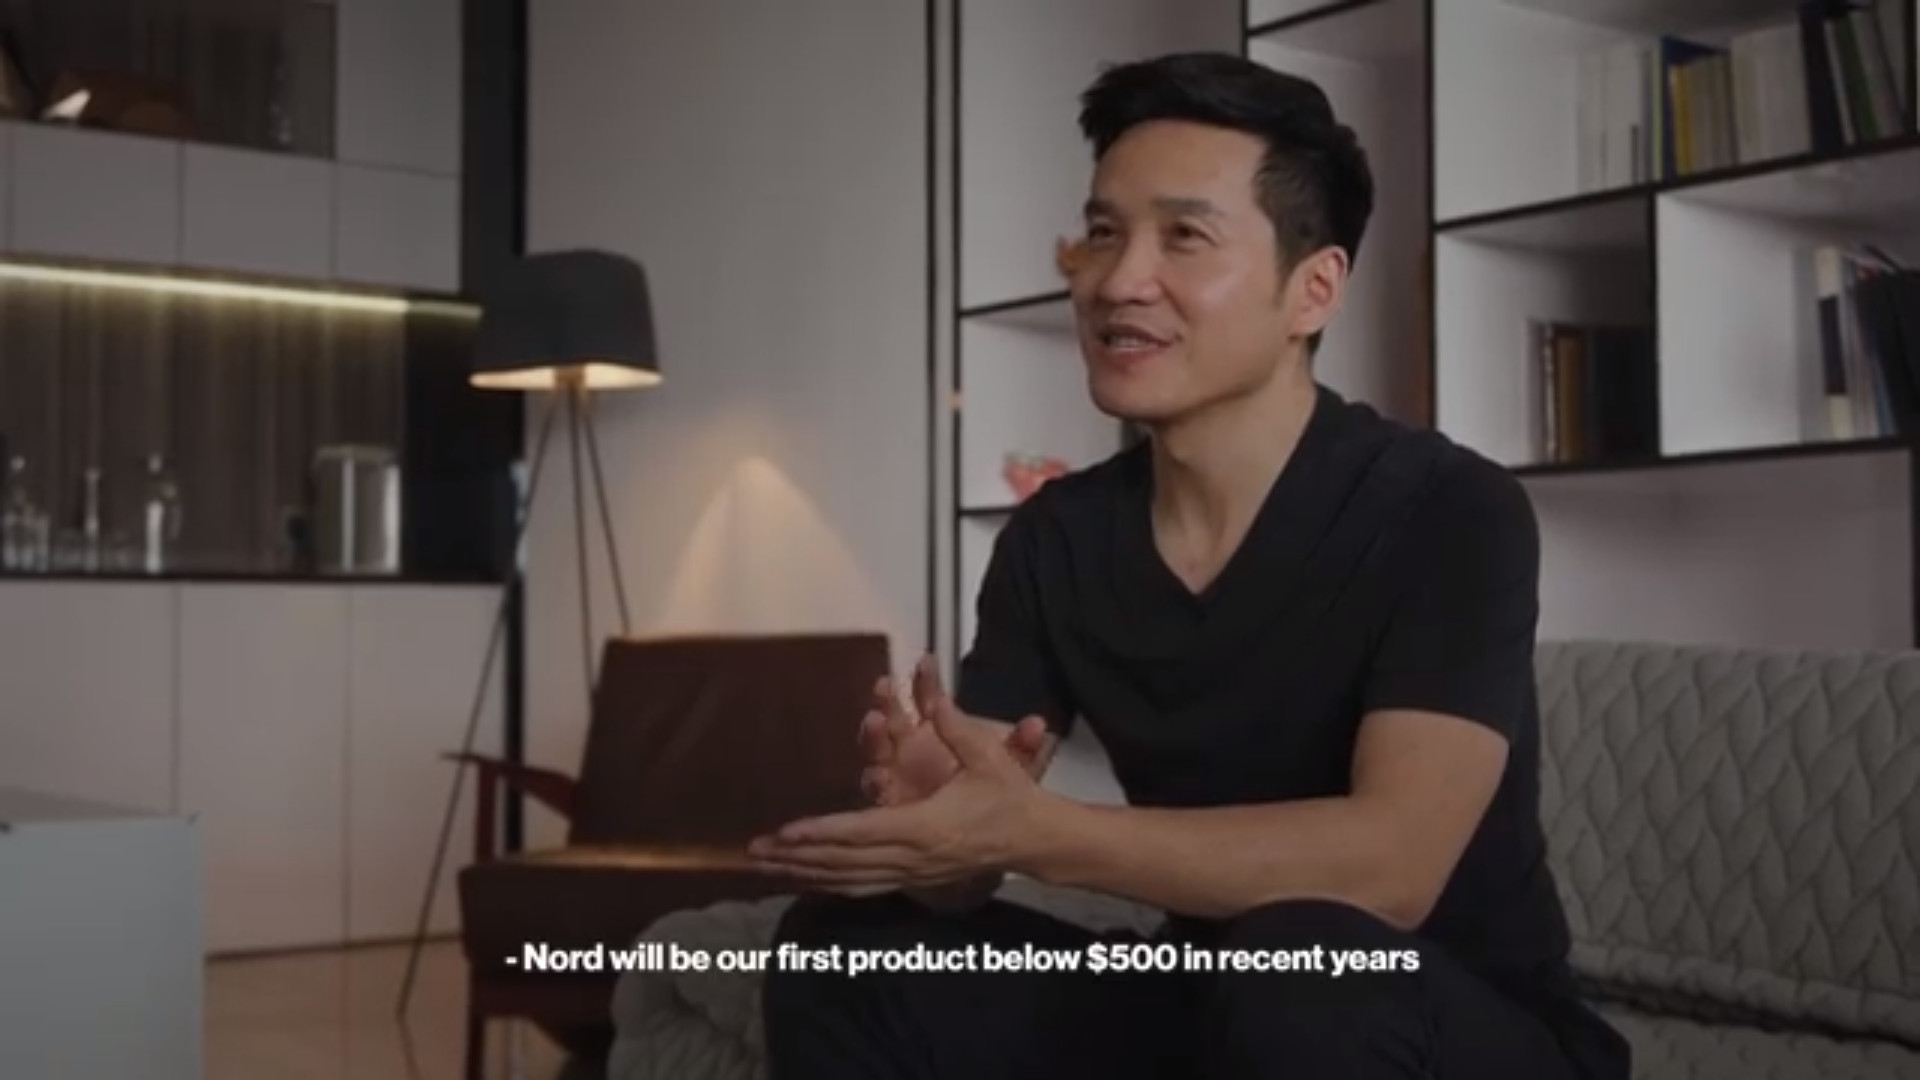 An excerpt from the OnePlus Nord New Beginnings video.